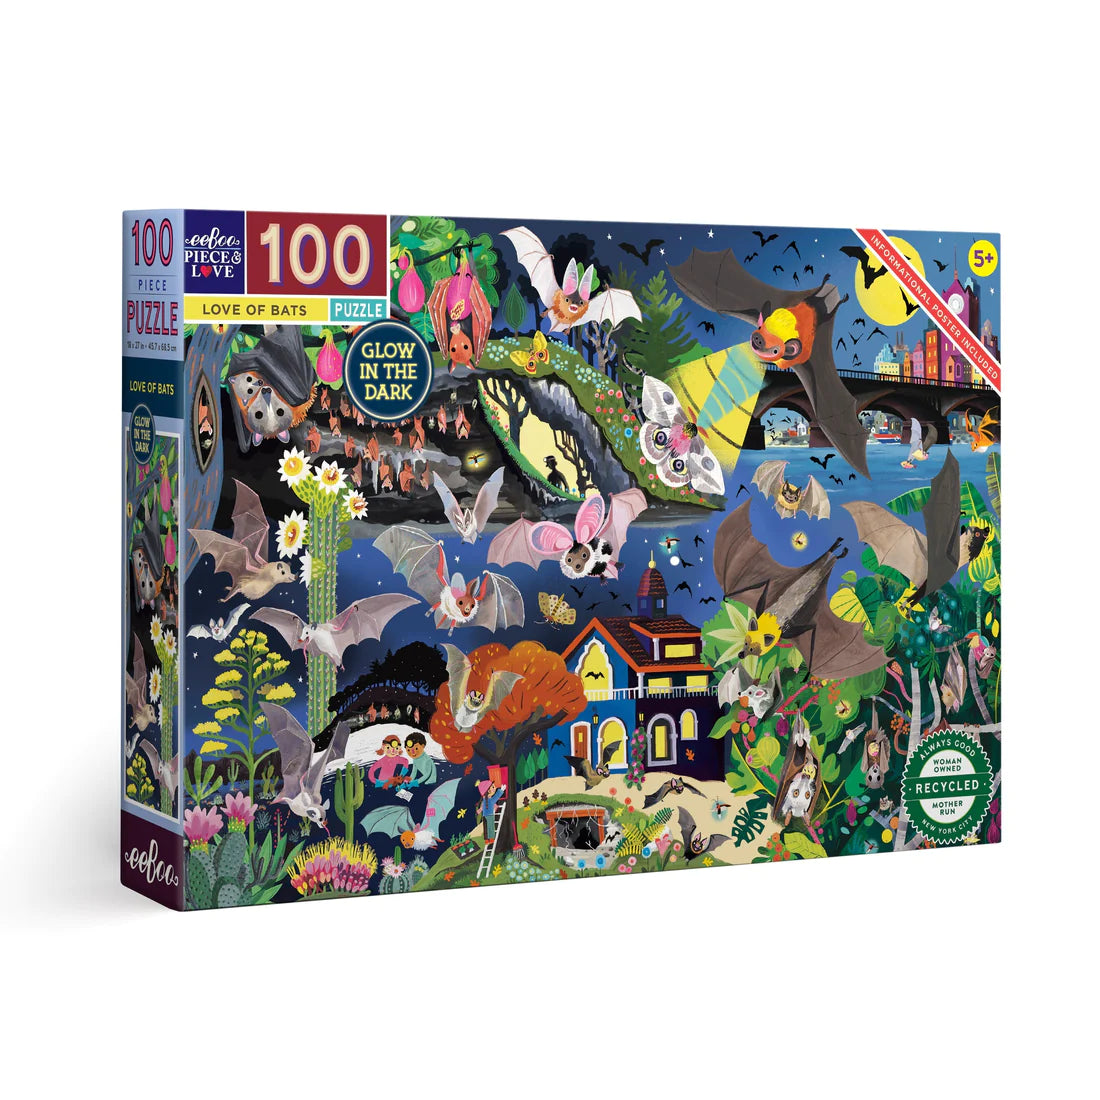 Puzzle Love of Bats (Glow in the Dark) 100 pc